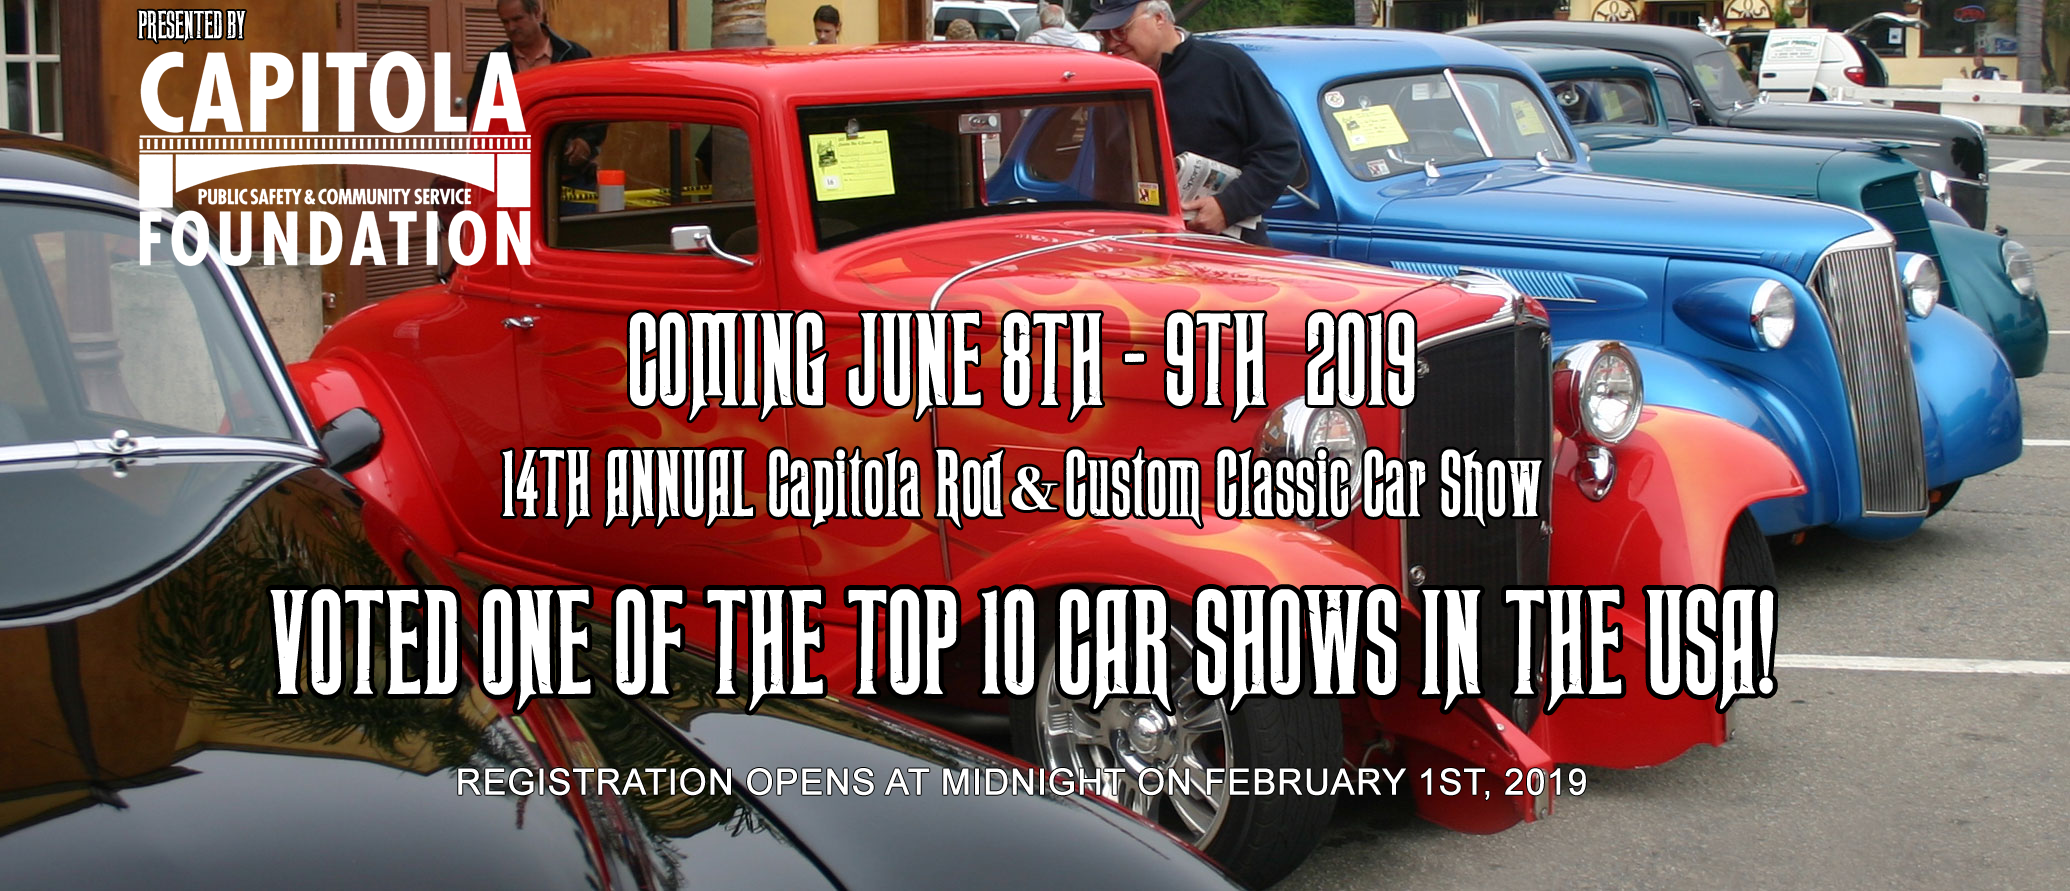 best car shows, best car shows in the US, best classic car shows, largest classic car shows, world's biggest car show, big car shows, largest classic car show in the world, top car shows, biggest car meet, biggest car shows in the US.